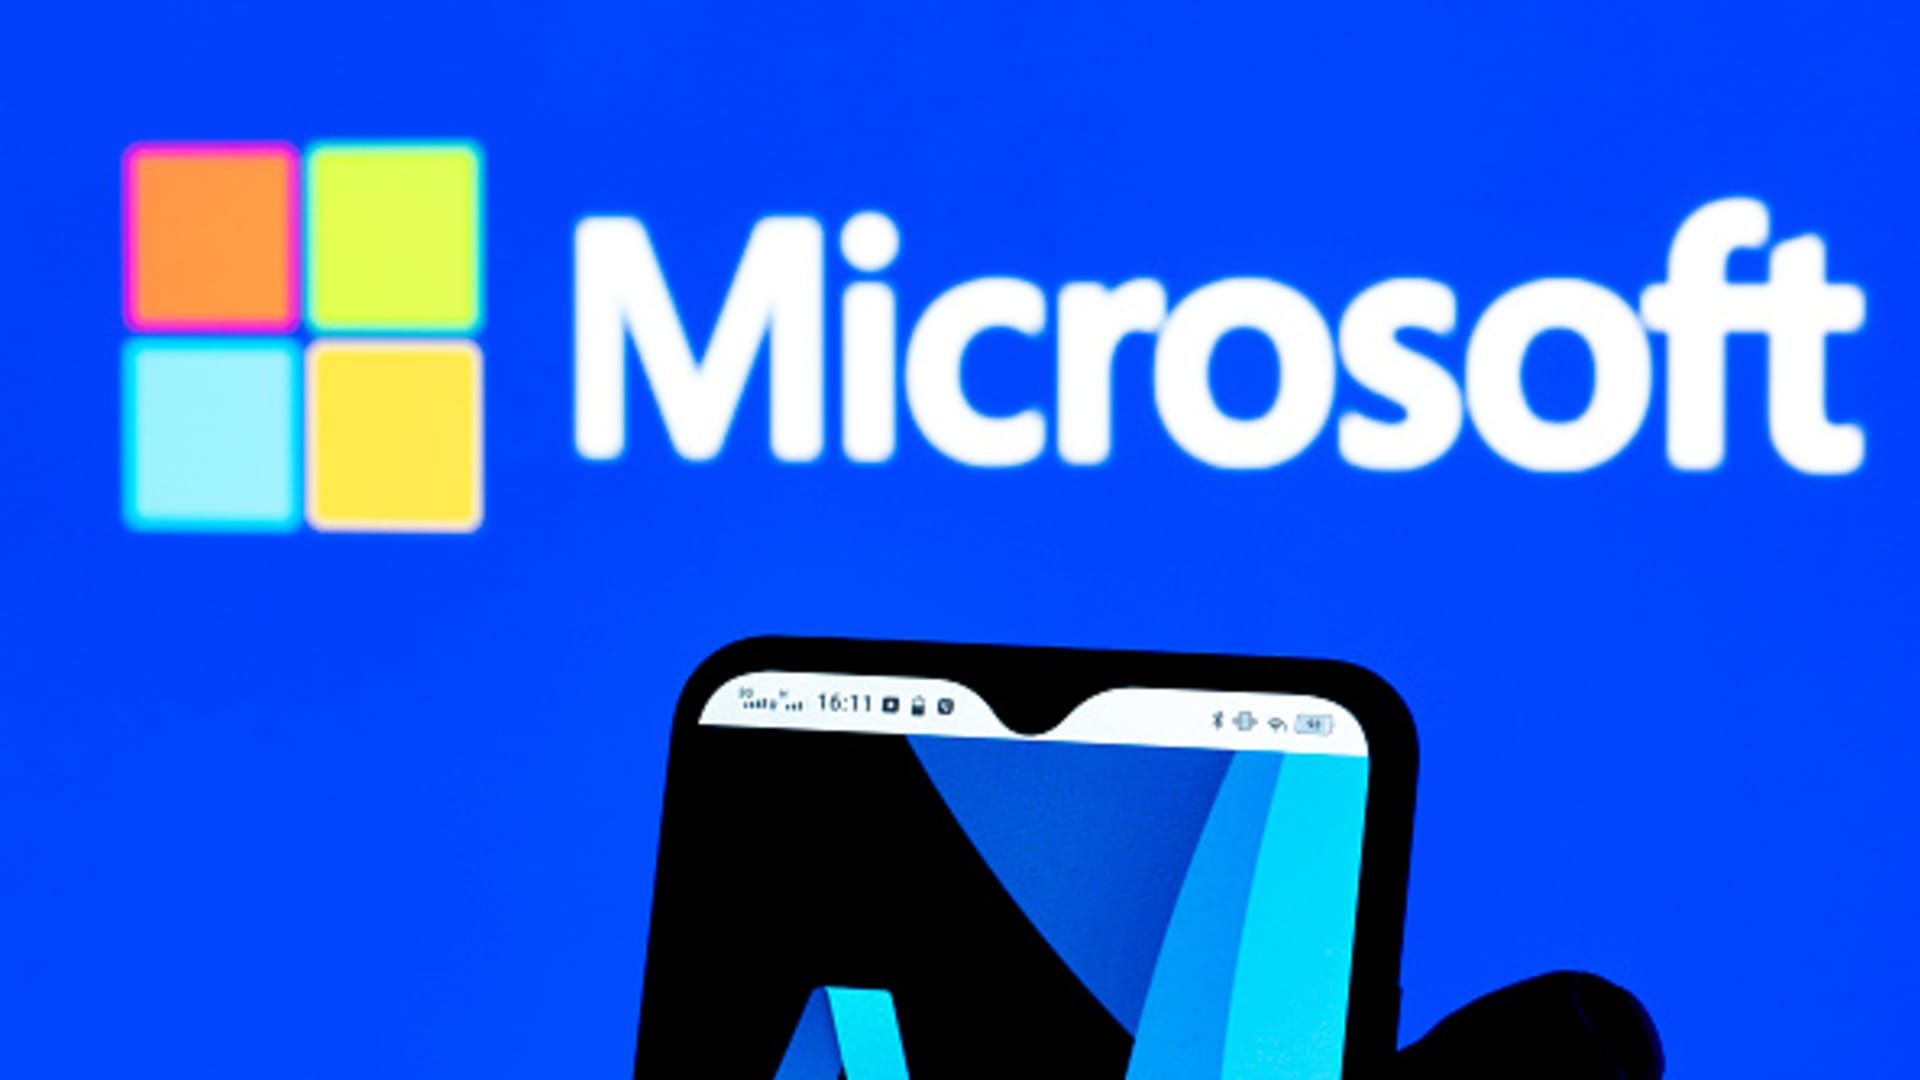 Microsoft destroys rival cloud firms' profit margins, Amazon-backed group alleges